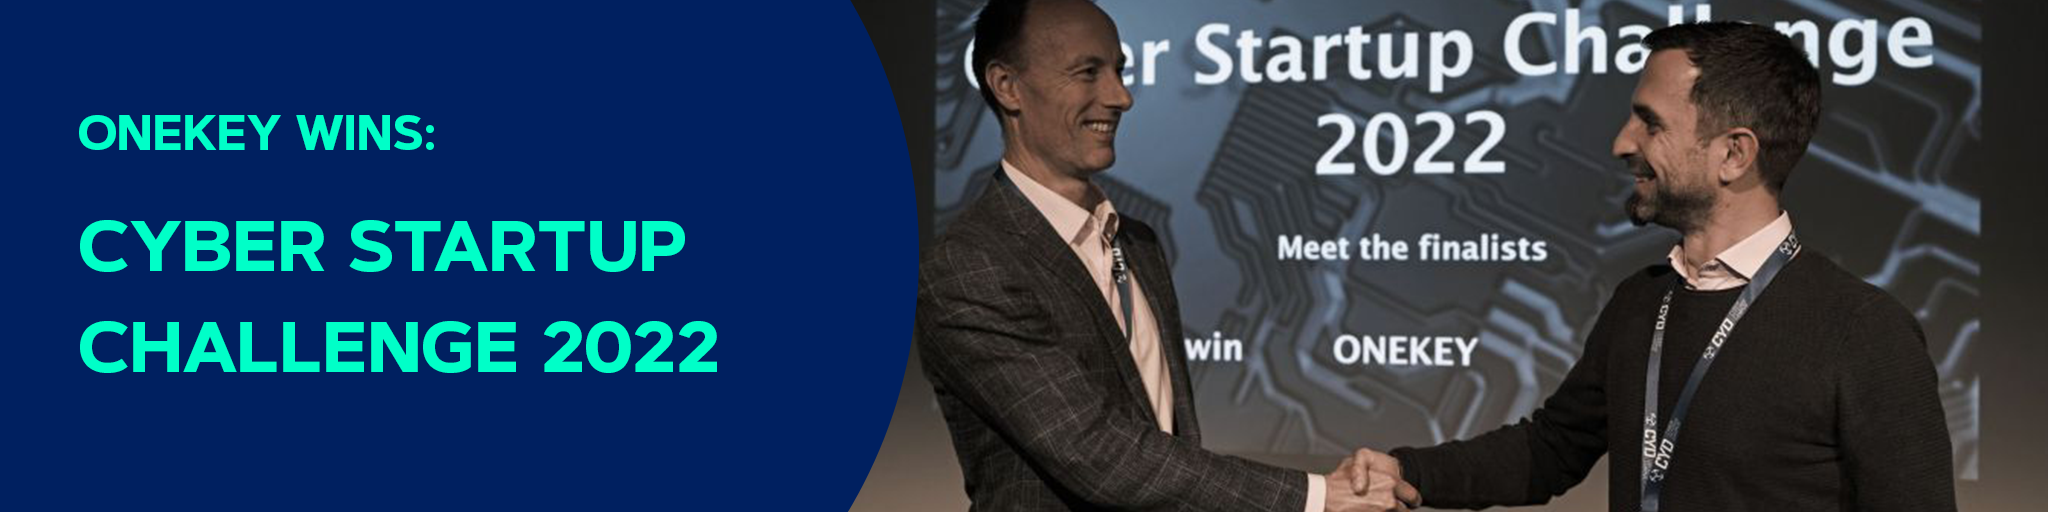 ONEKEY WINS THE CYBER STARTUP CHALLENGE 2022 Blog Banner